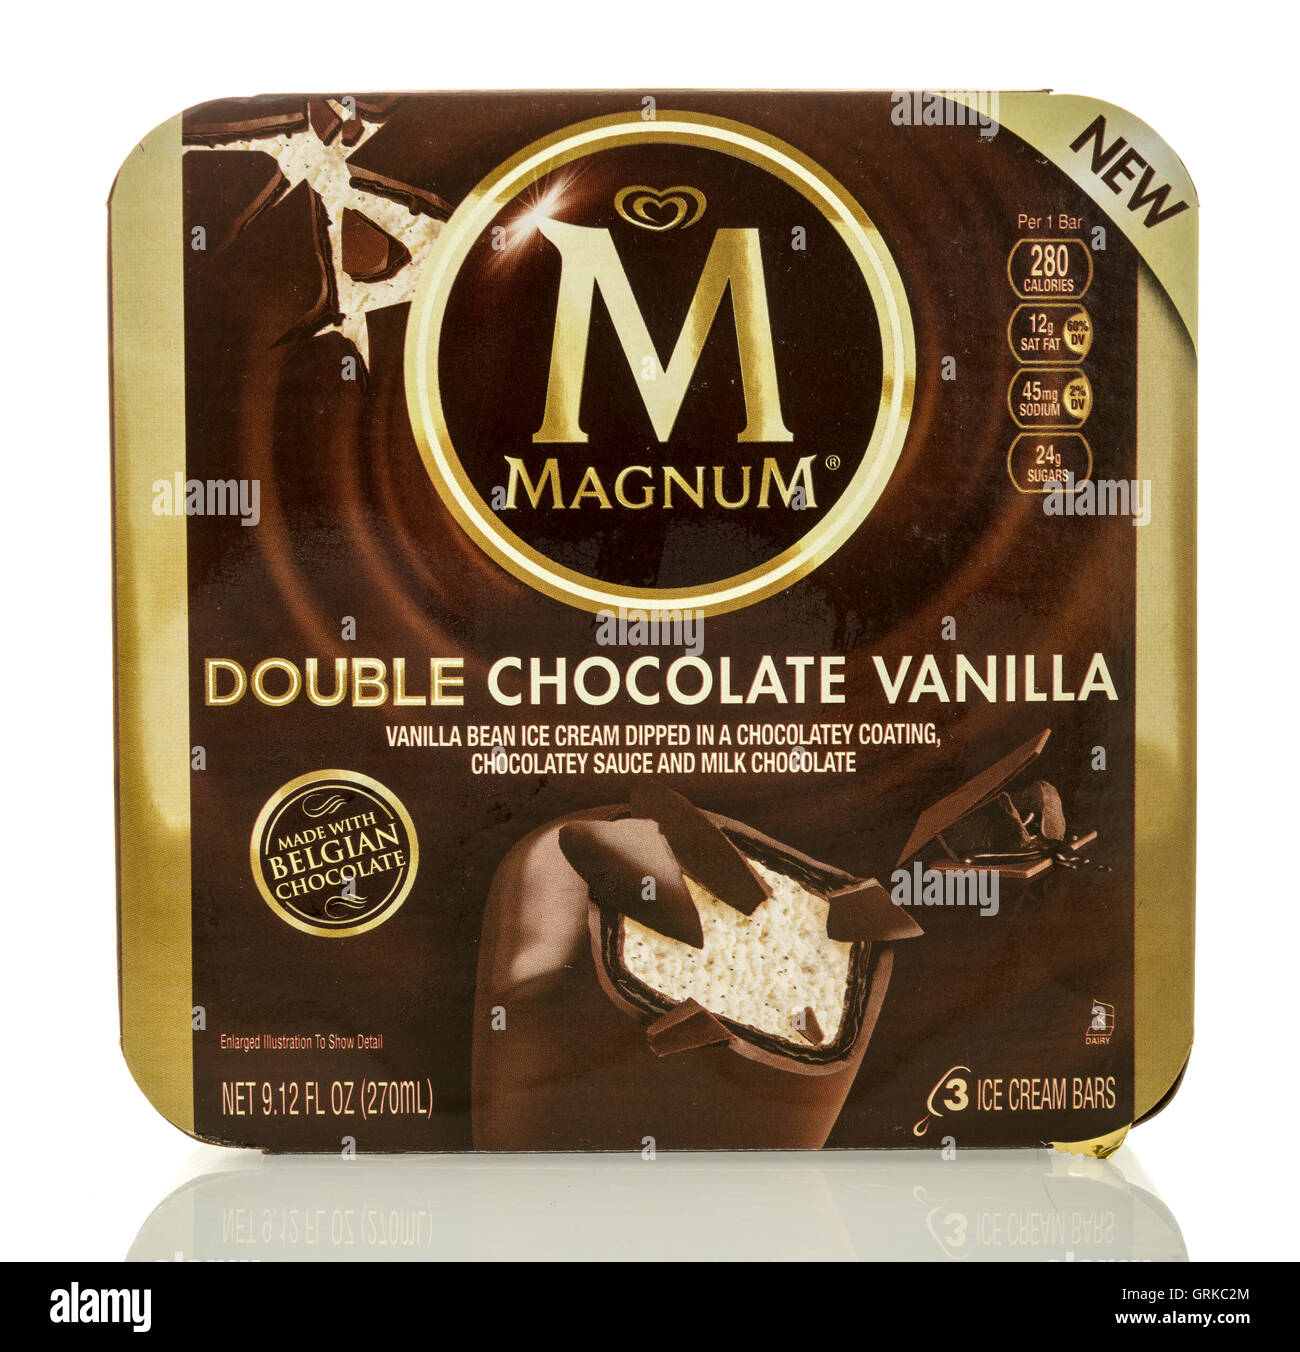 Winneconne, WI - 27 August 2016:  Box of Magnum double chocolate vanilla ice cream bars on an isolated background. Stock Photo